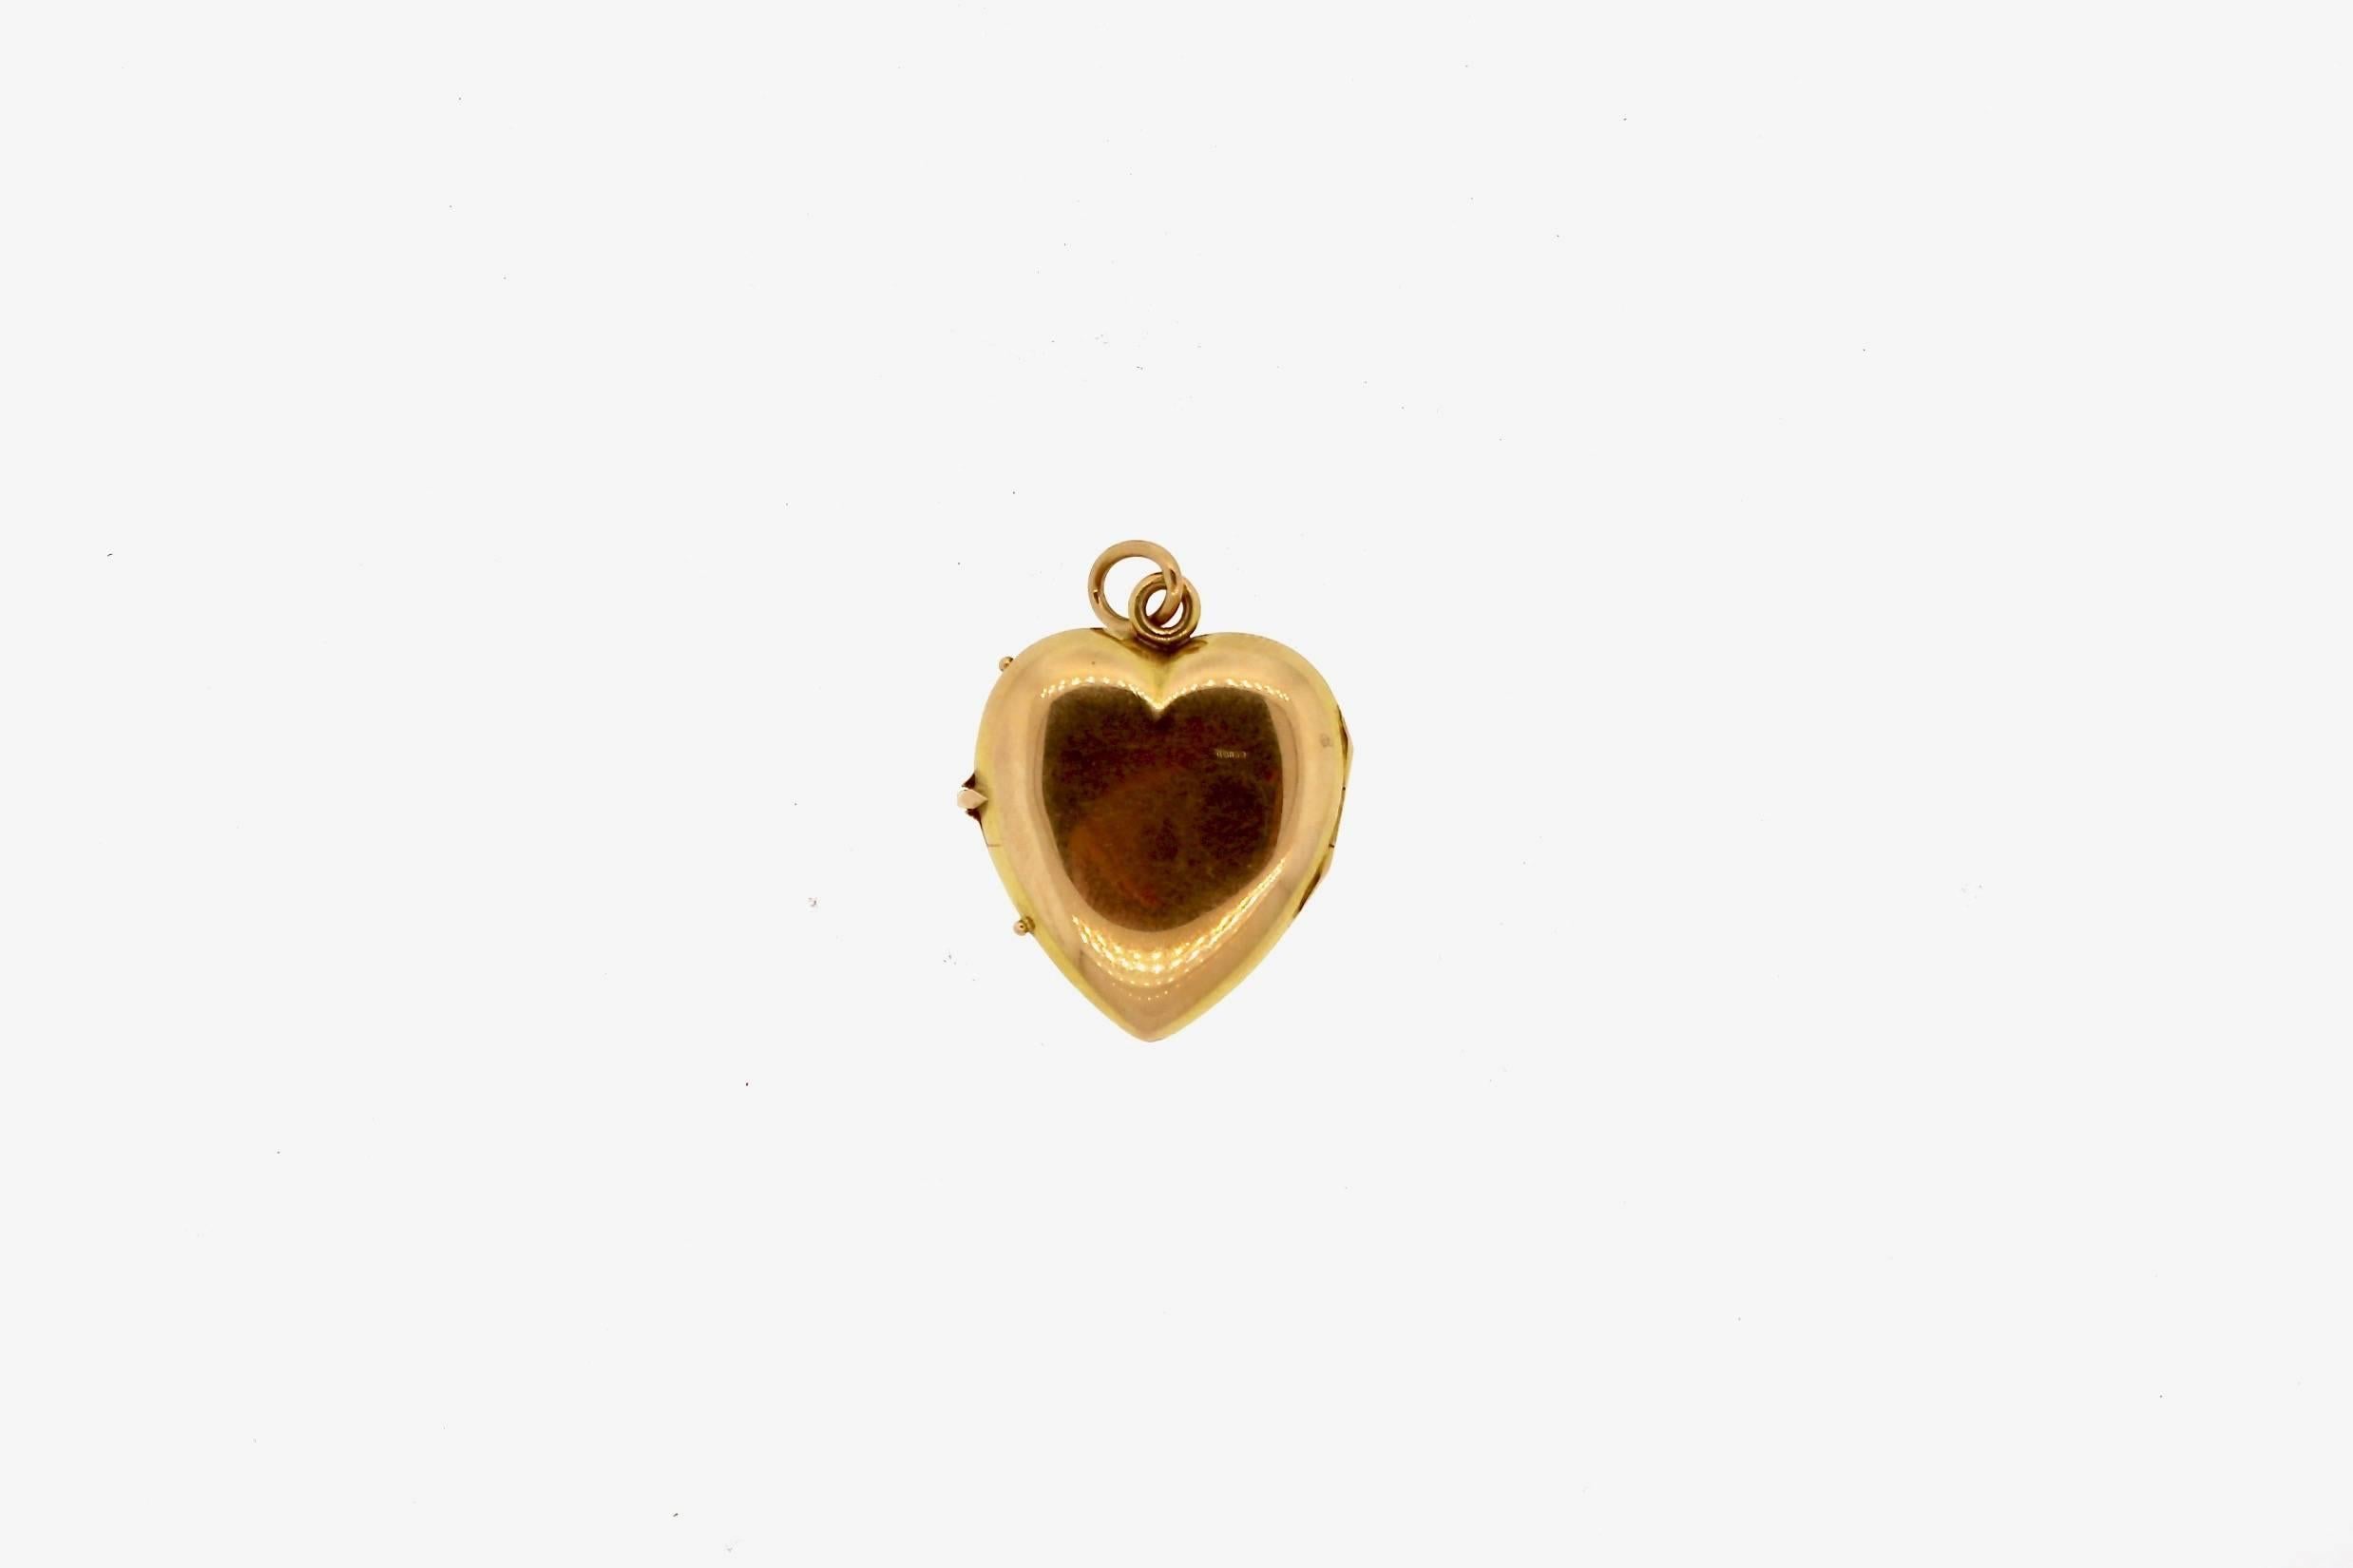 A sweet and sentimental heart locket pendant with a painted purple and yellow pansy on the front.  The locket opens and can hold photographs.  The locket is made in 14k gold and likely made in the United States.  